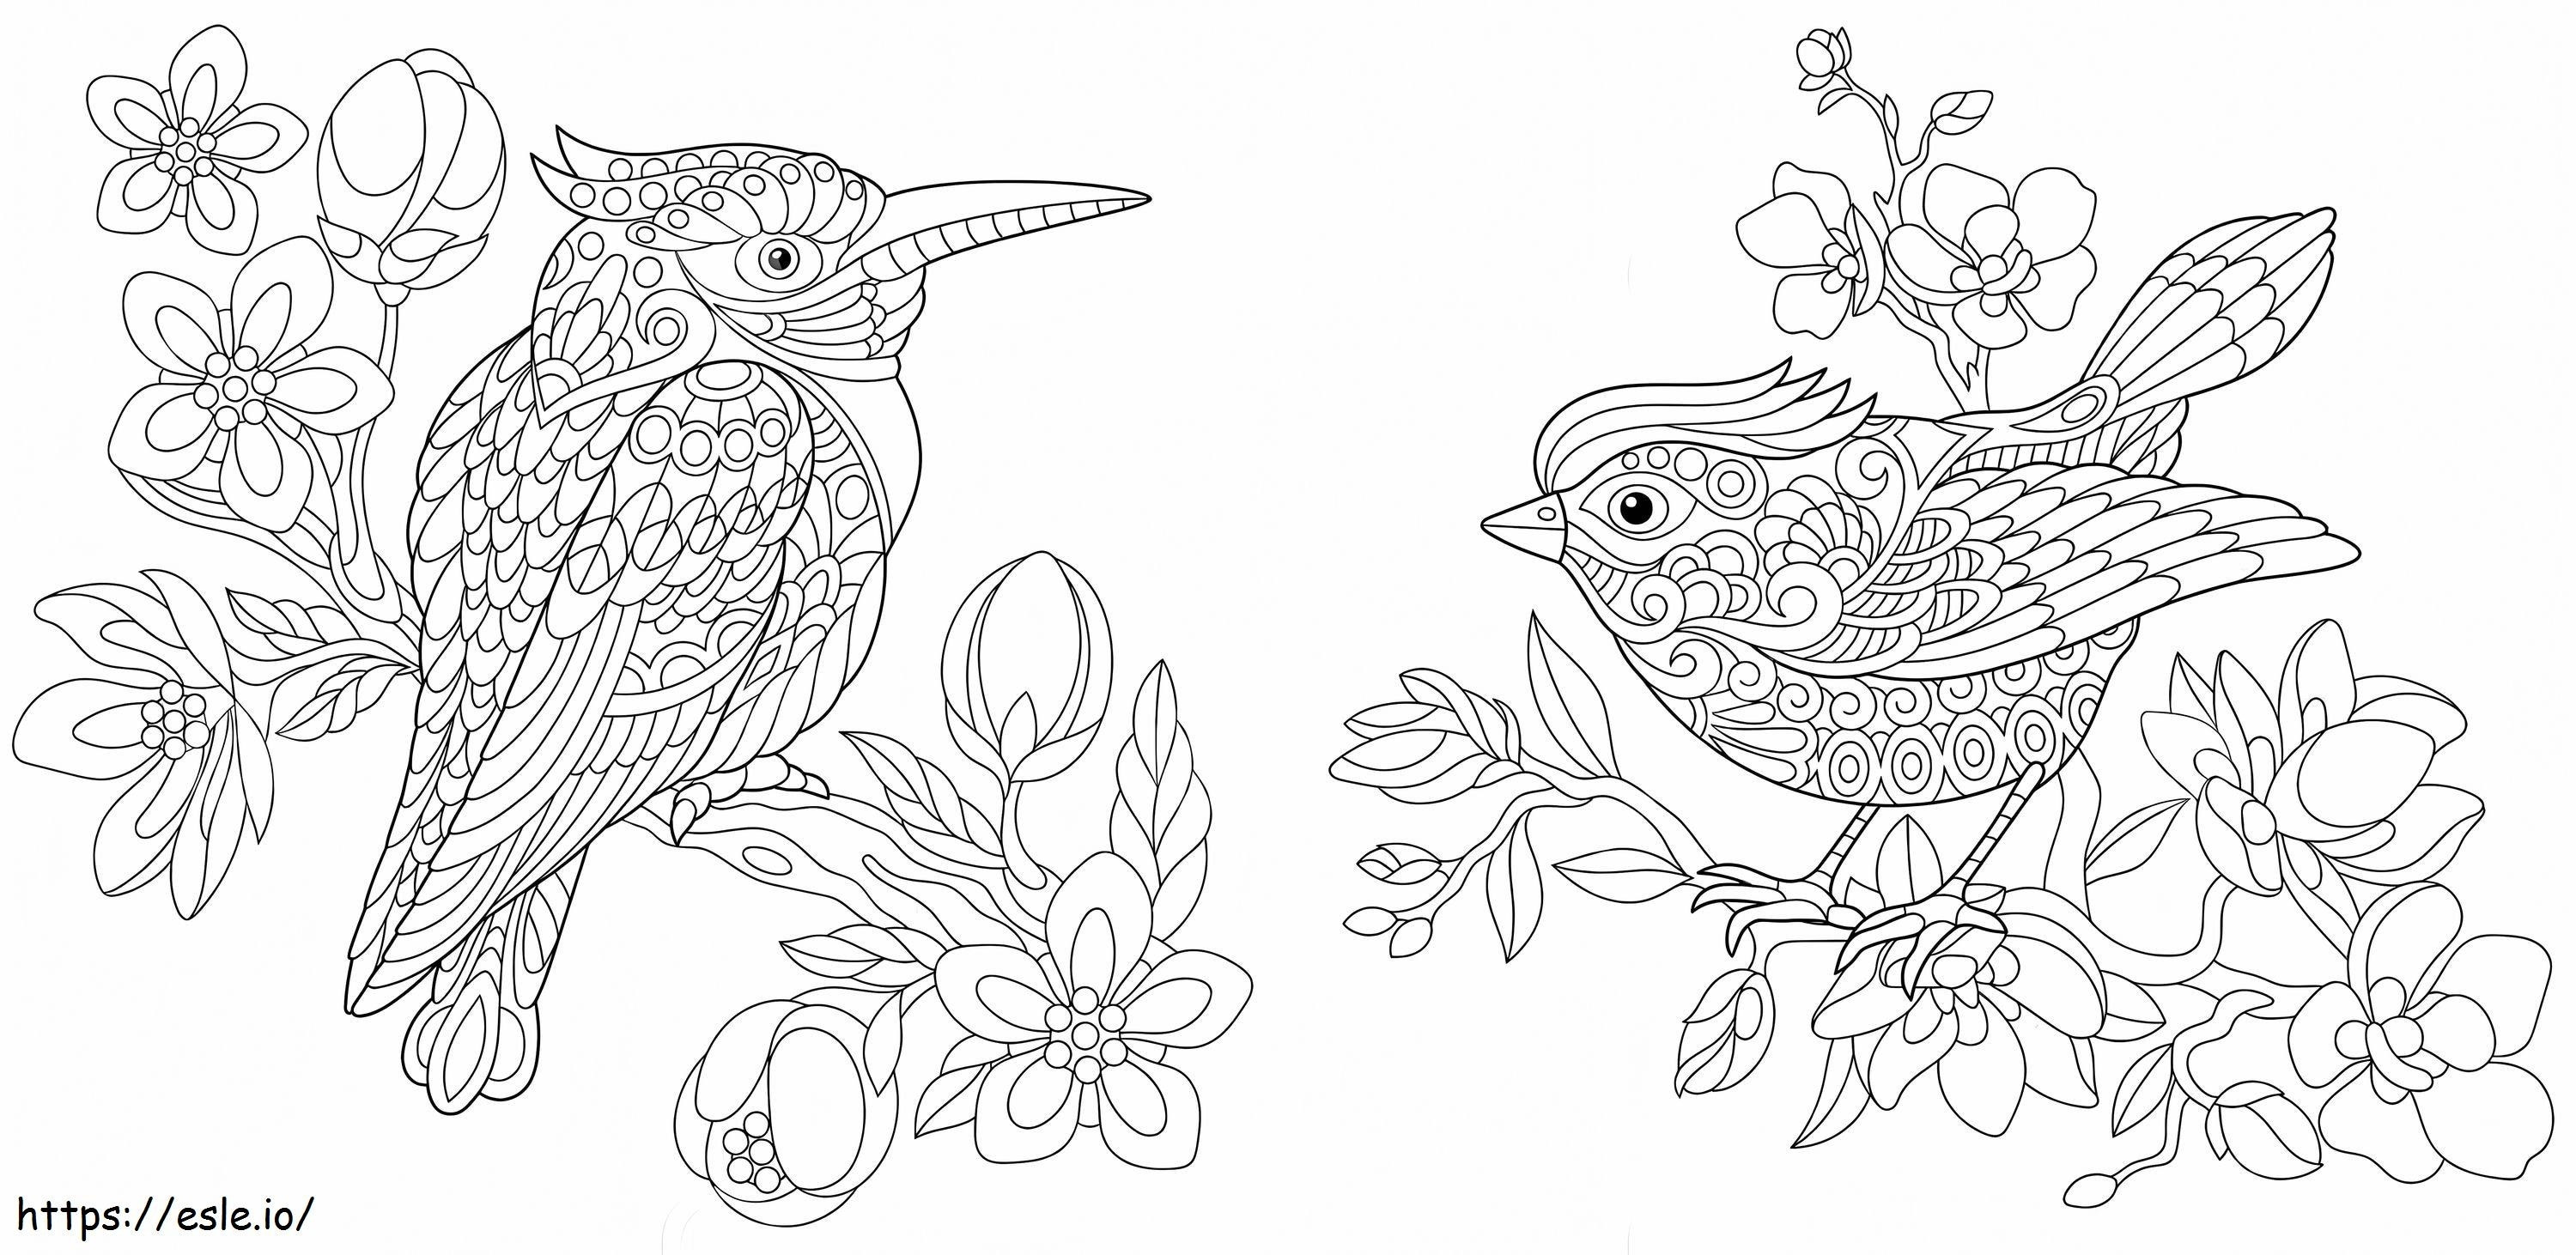 Canary For Adult coloring page